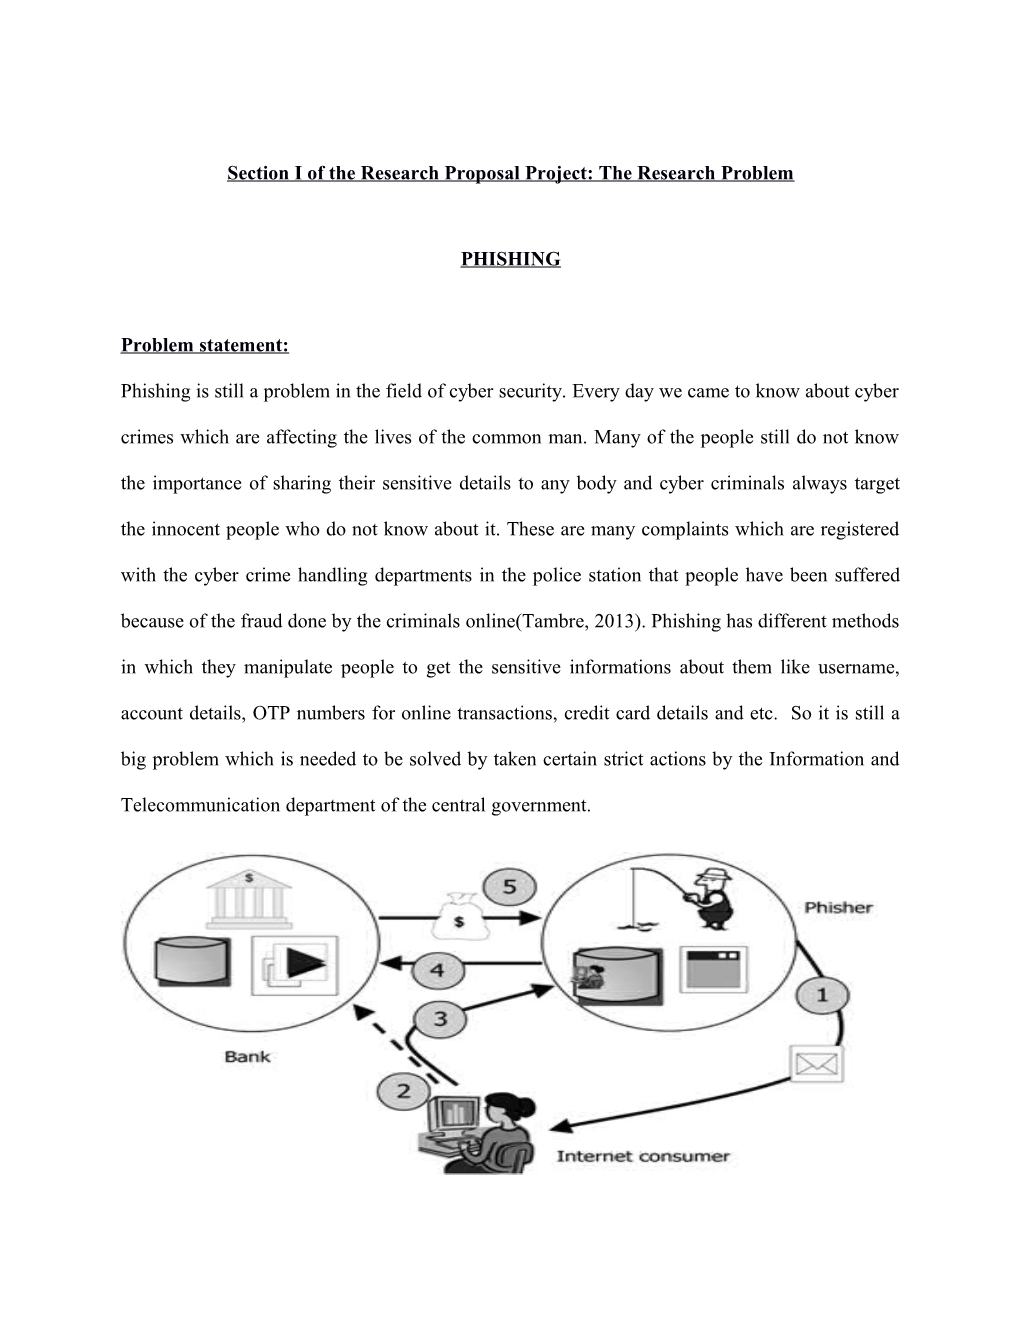 Section I of the Research Proposal Project: the Research Problem